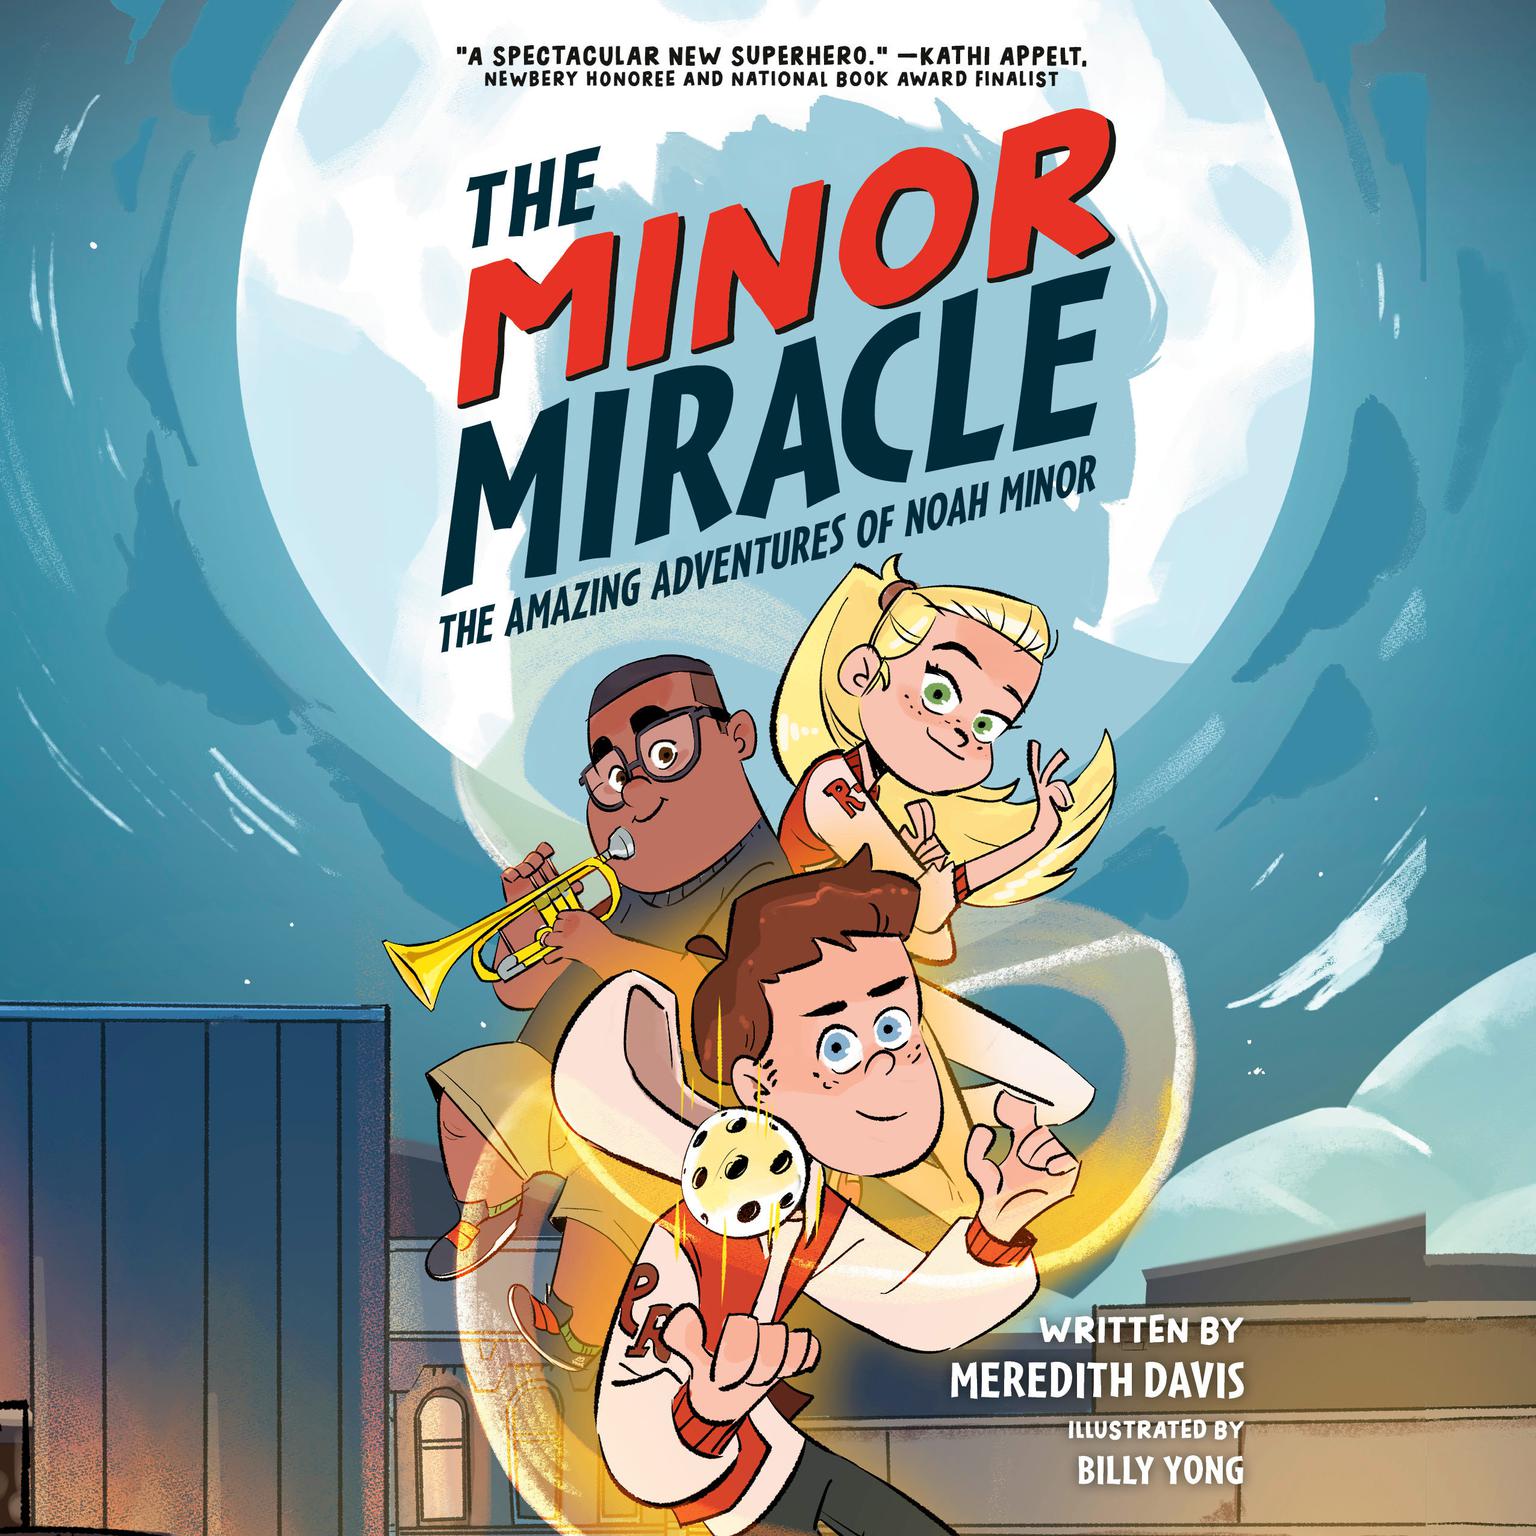 The Minor Miracle: The Amazing Adventures of Noah Minor Audiobook, by Meredith Davis